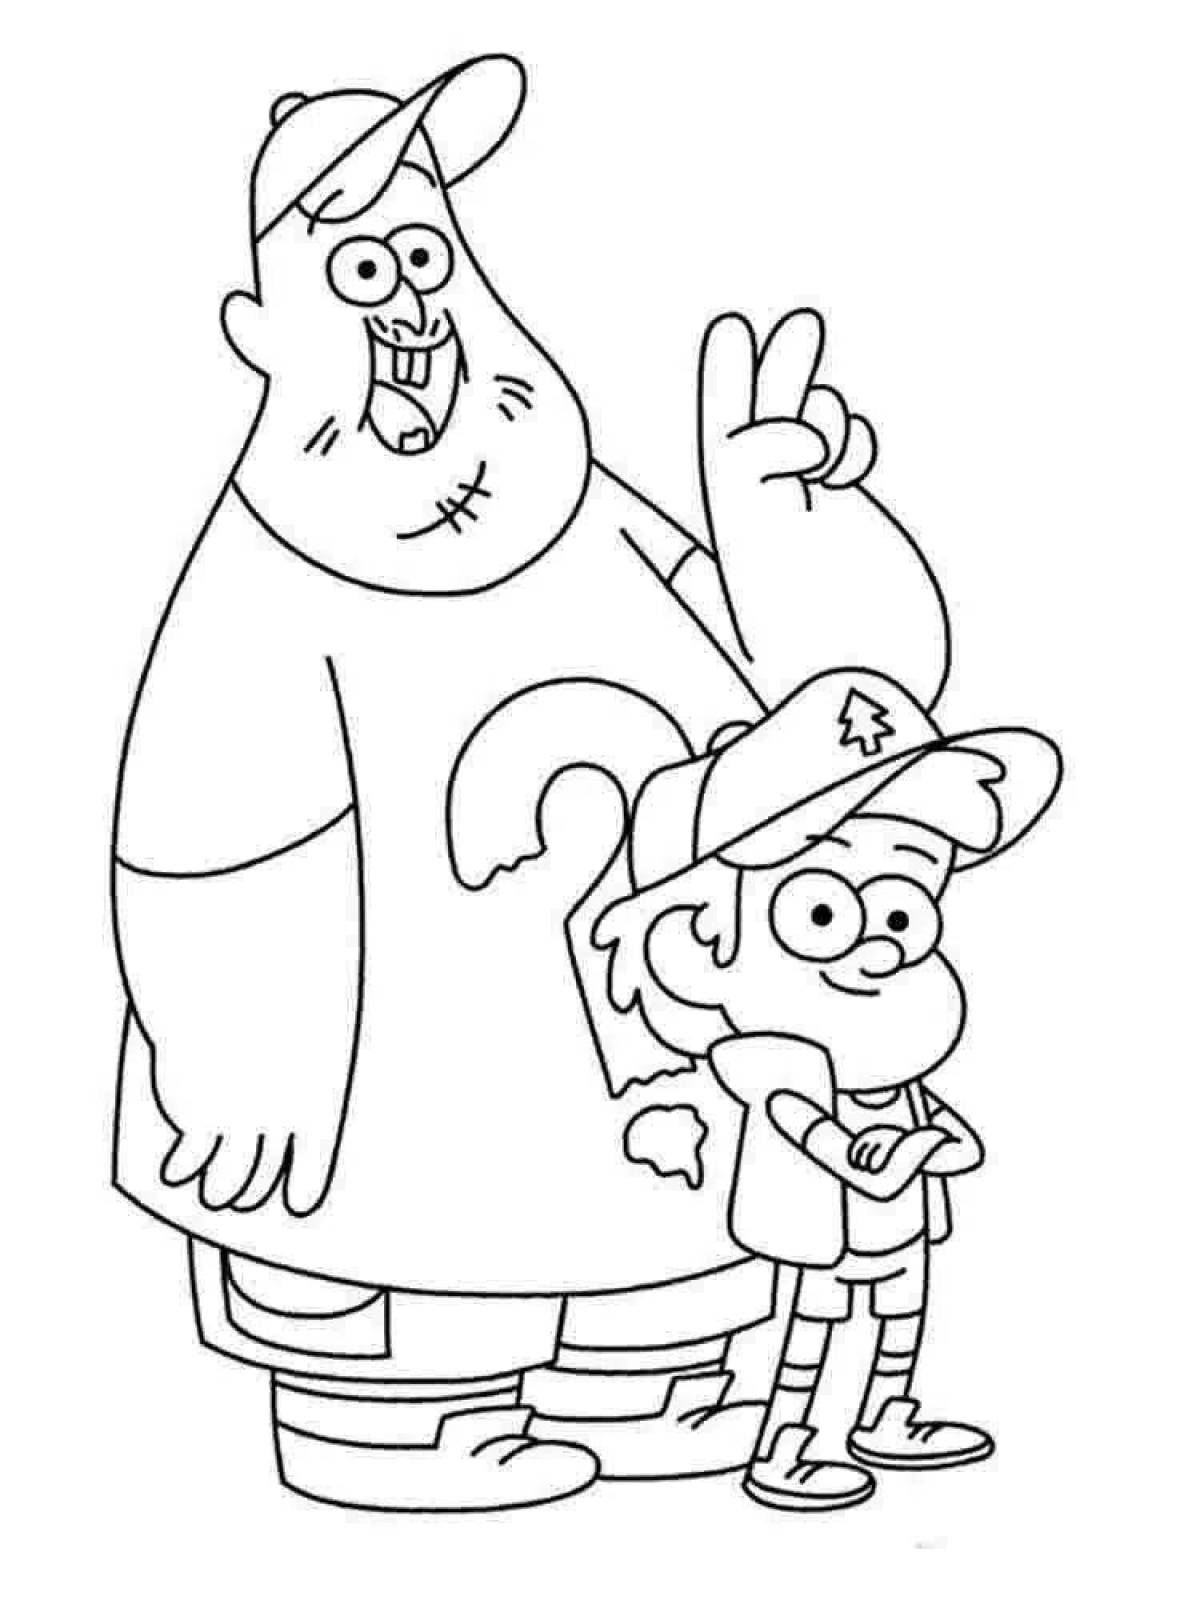 Glitter gravity falls everything coloring page